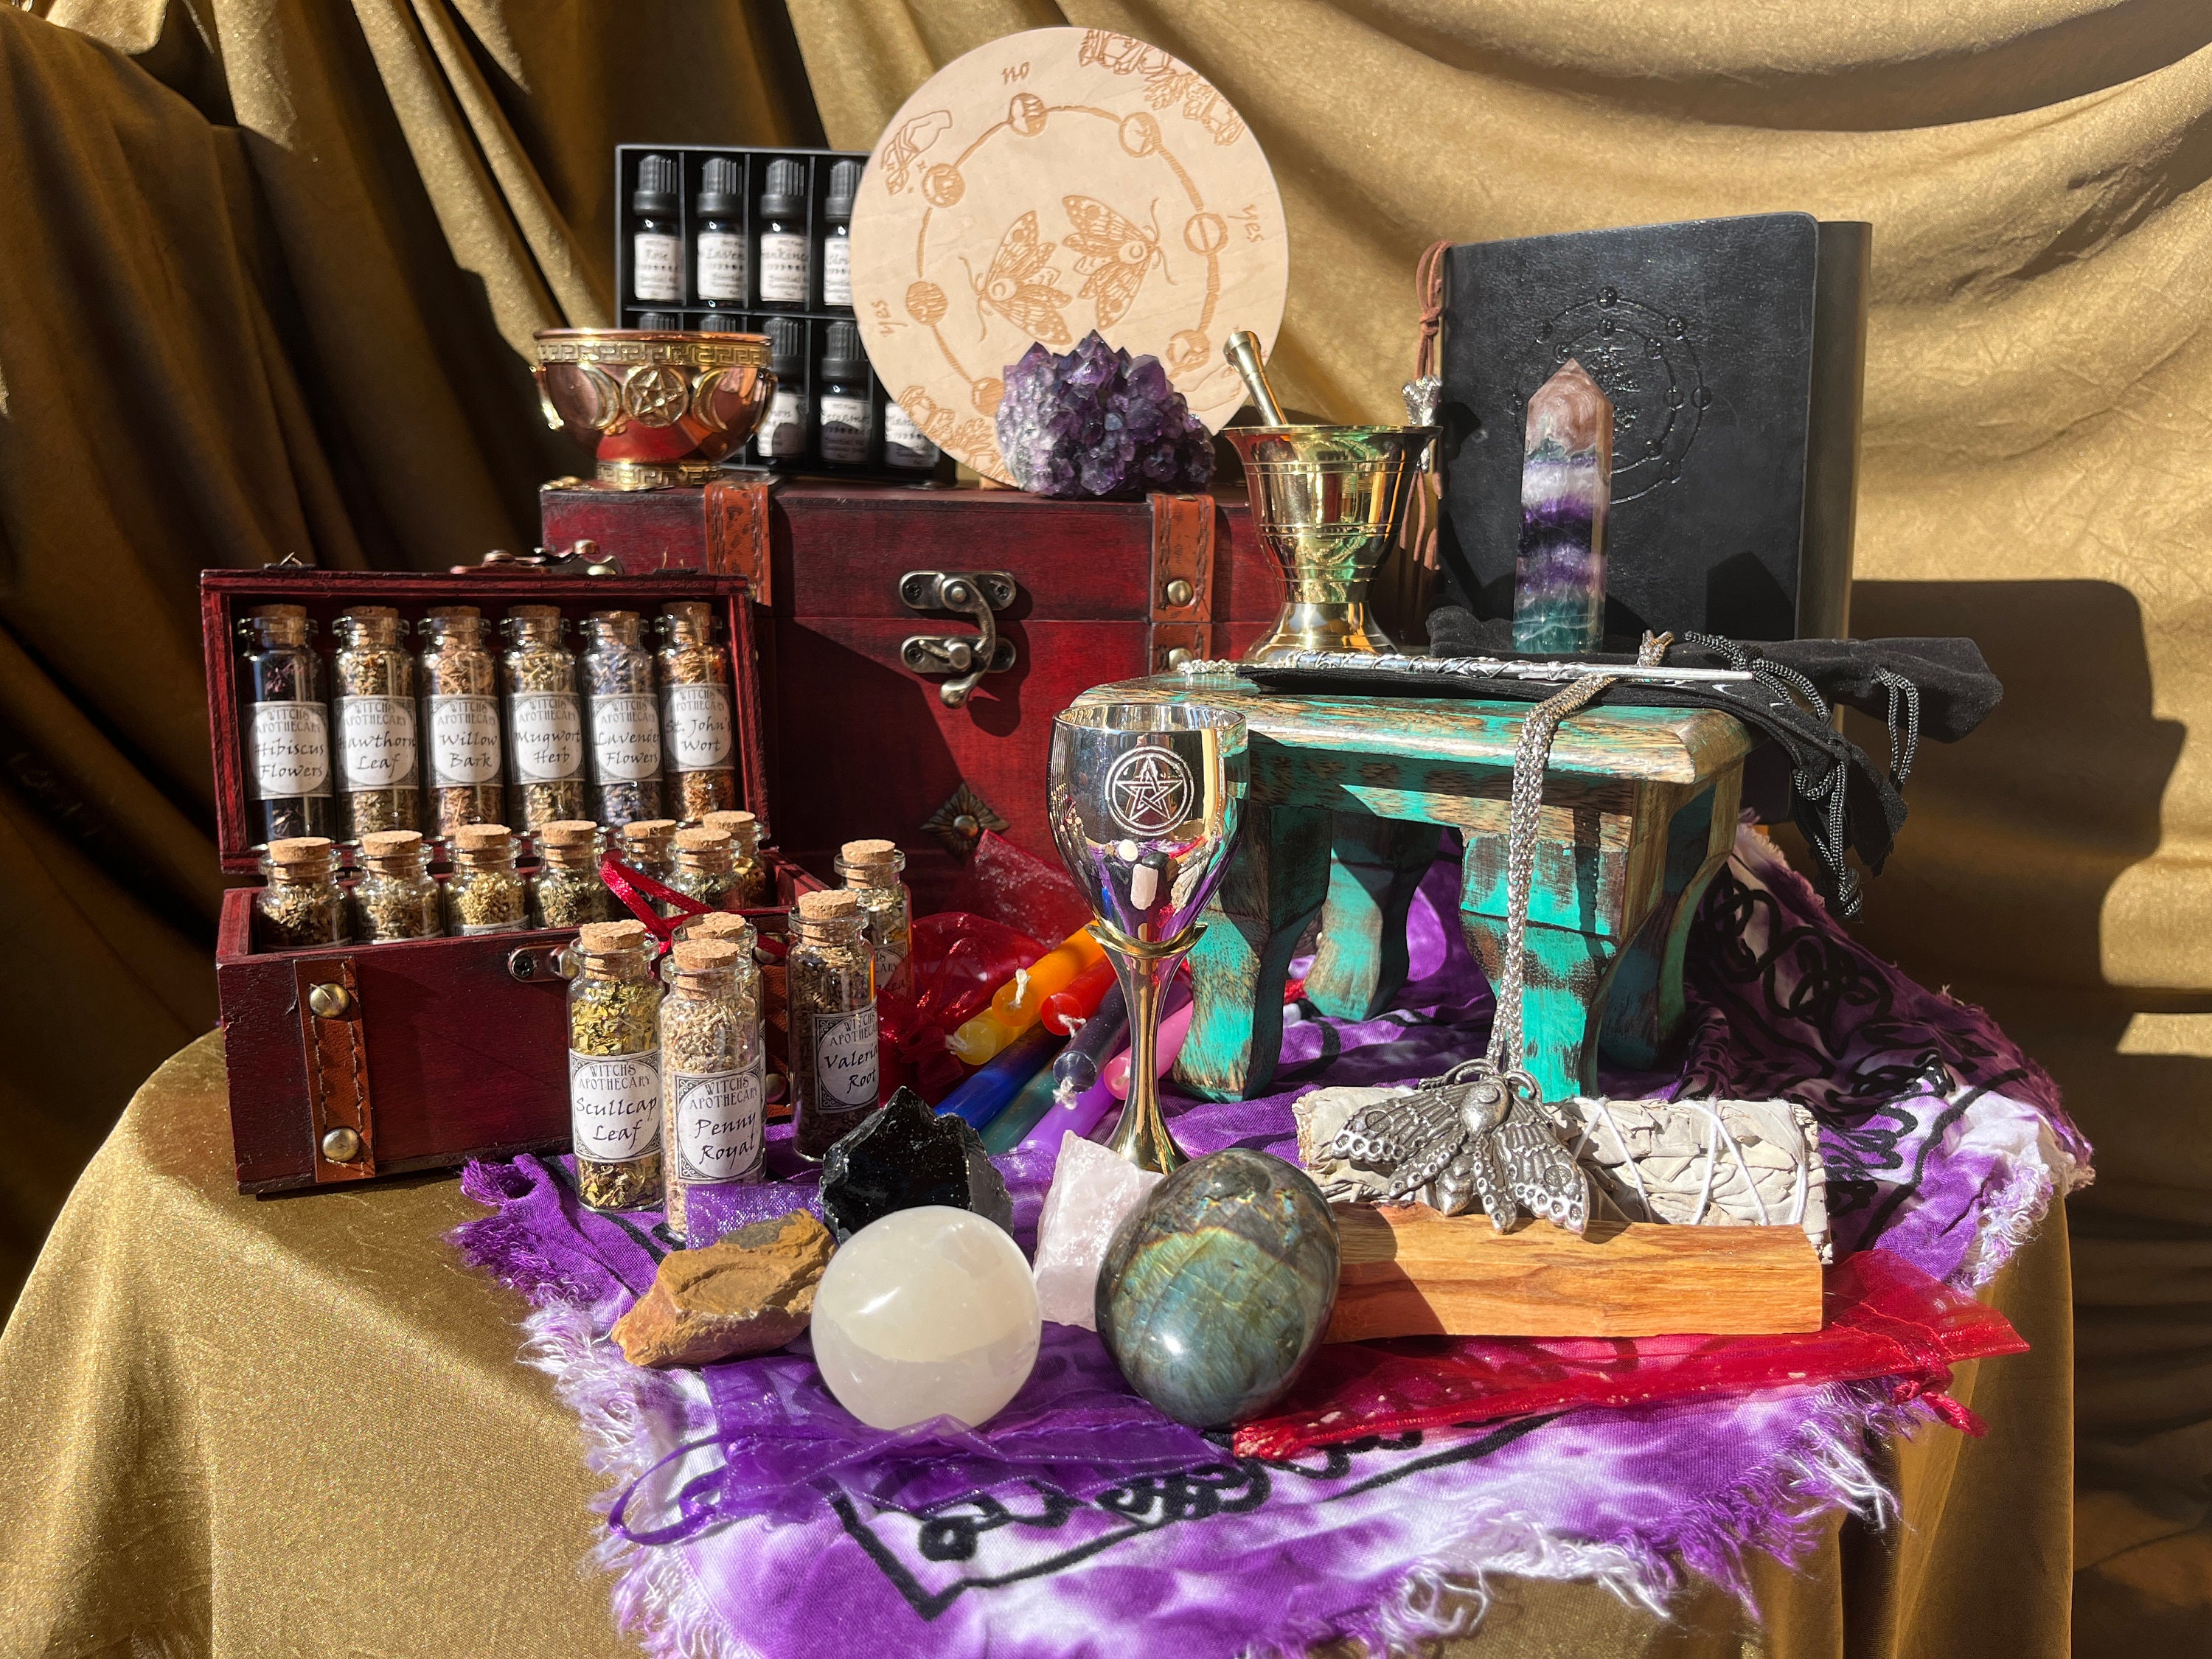 Witchcraft KIT- a Vintage Box Include Herbs Set & Brass Wand & Crystal Set  with Book of Shadows(Wicca Altar Supplies)